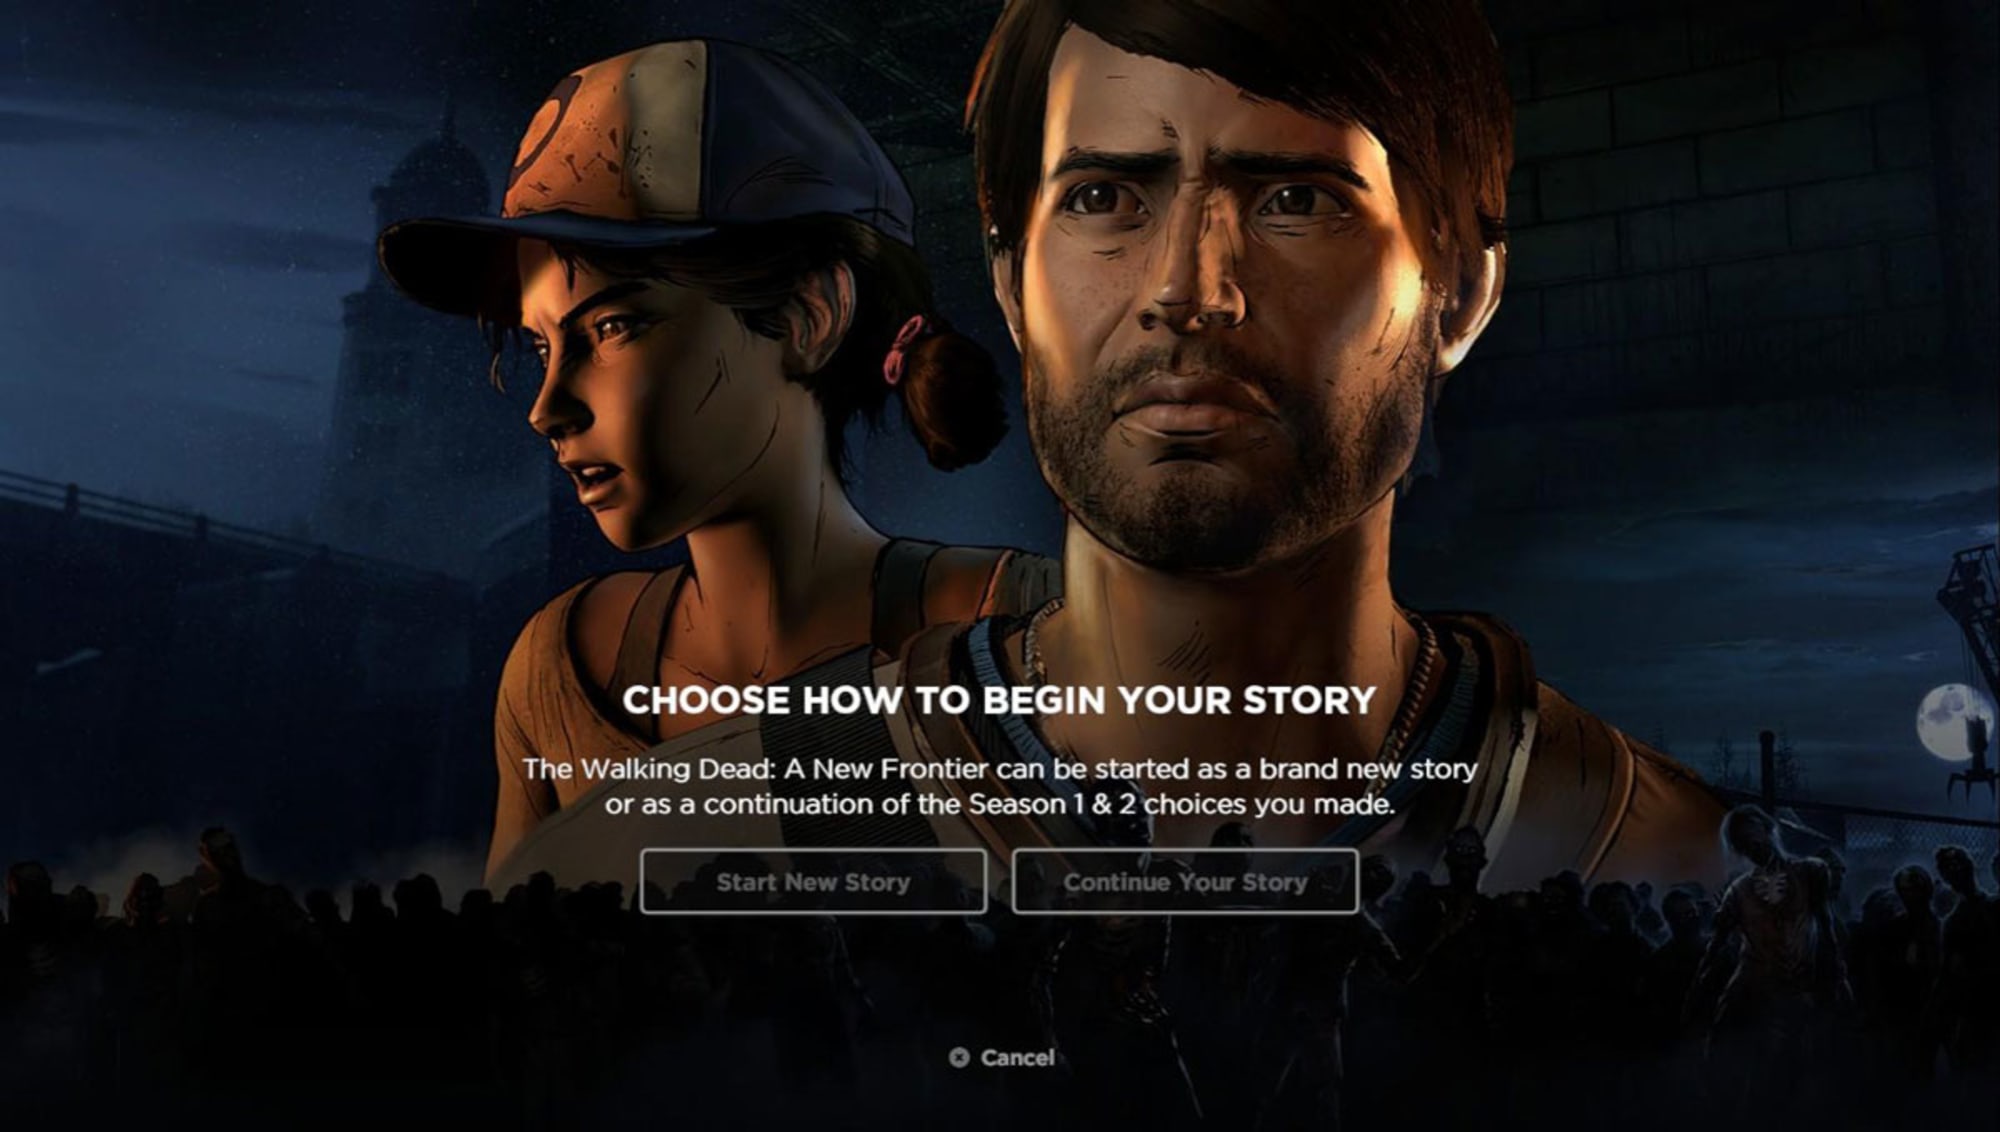 Make new story. The Walking Dead: a New Frontier. The Walking Dead a New Frontier меню игры. The Walking Dead: a New Frontier Telltale. New Frontier игра.